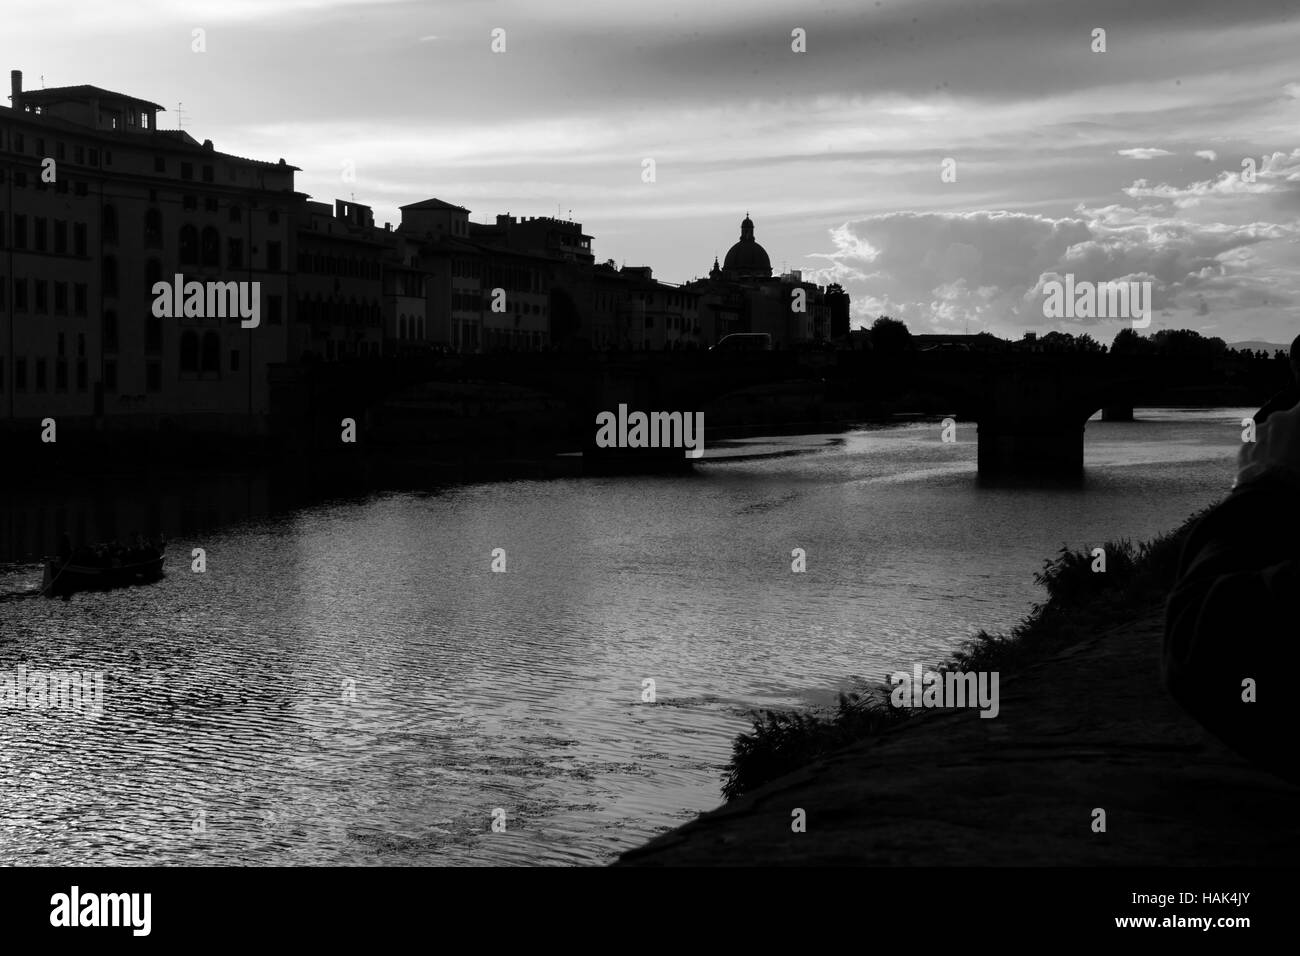 Florence silhouette with  Arno River and Medieval stone bridge , capital of Tuscany region, Italy Stock Photo